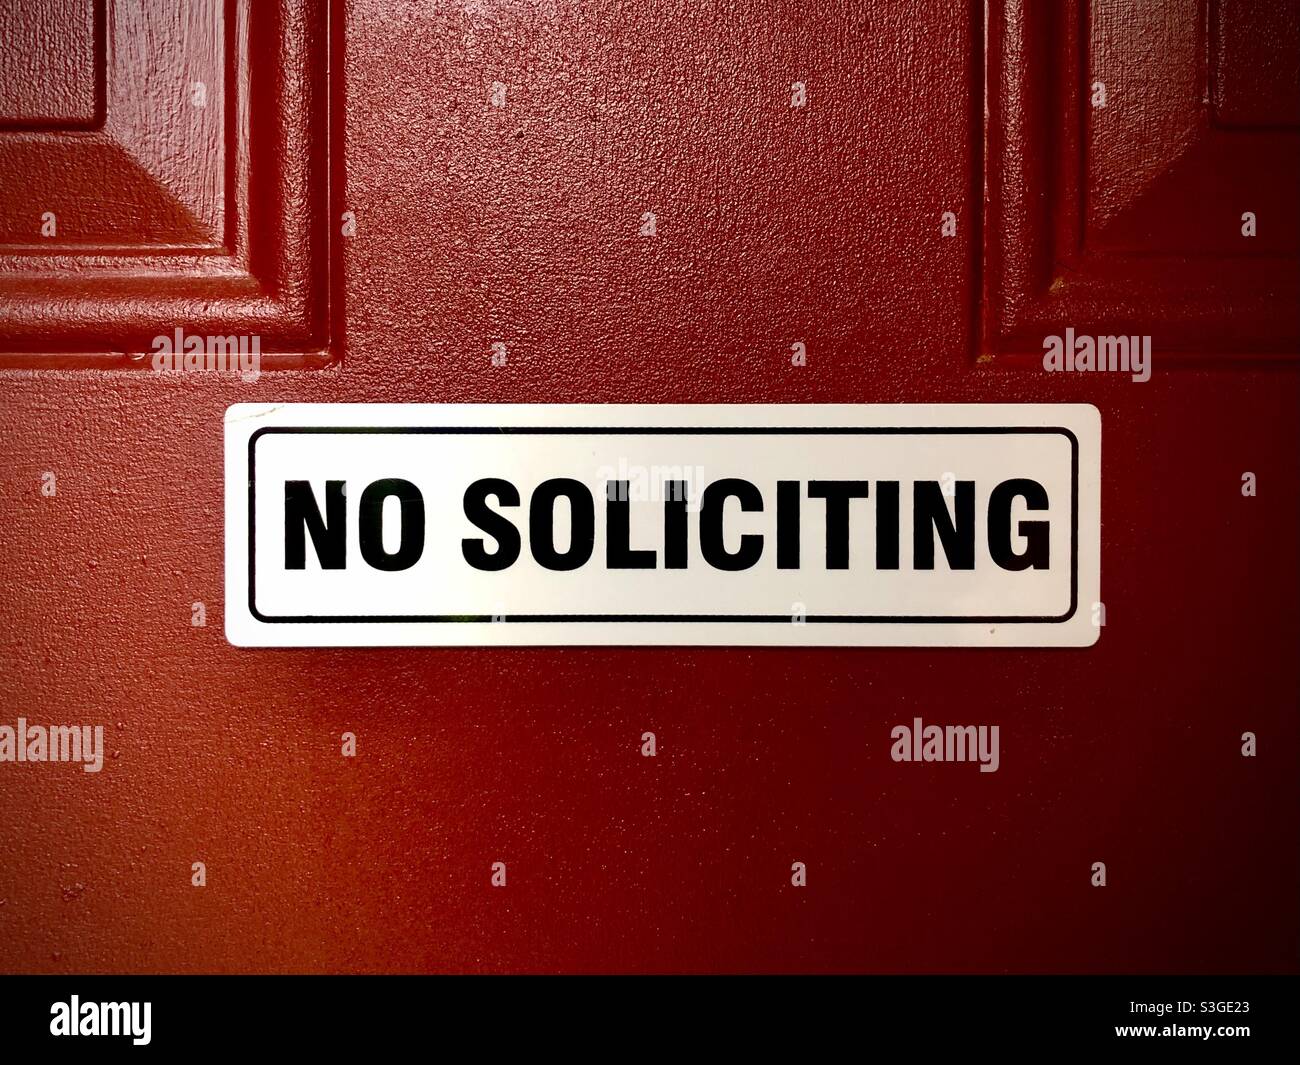 No soliciting sign on a red door Stock Photo